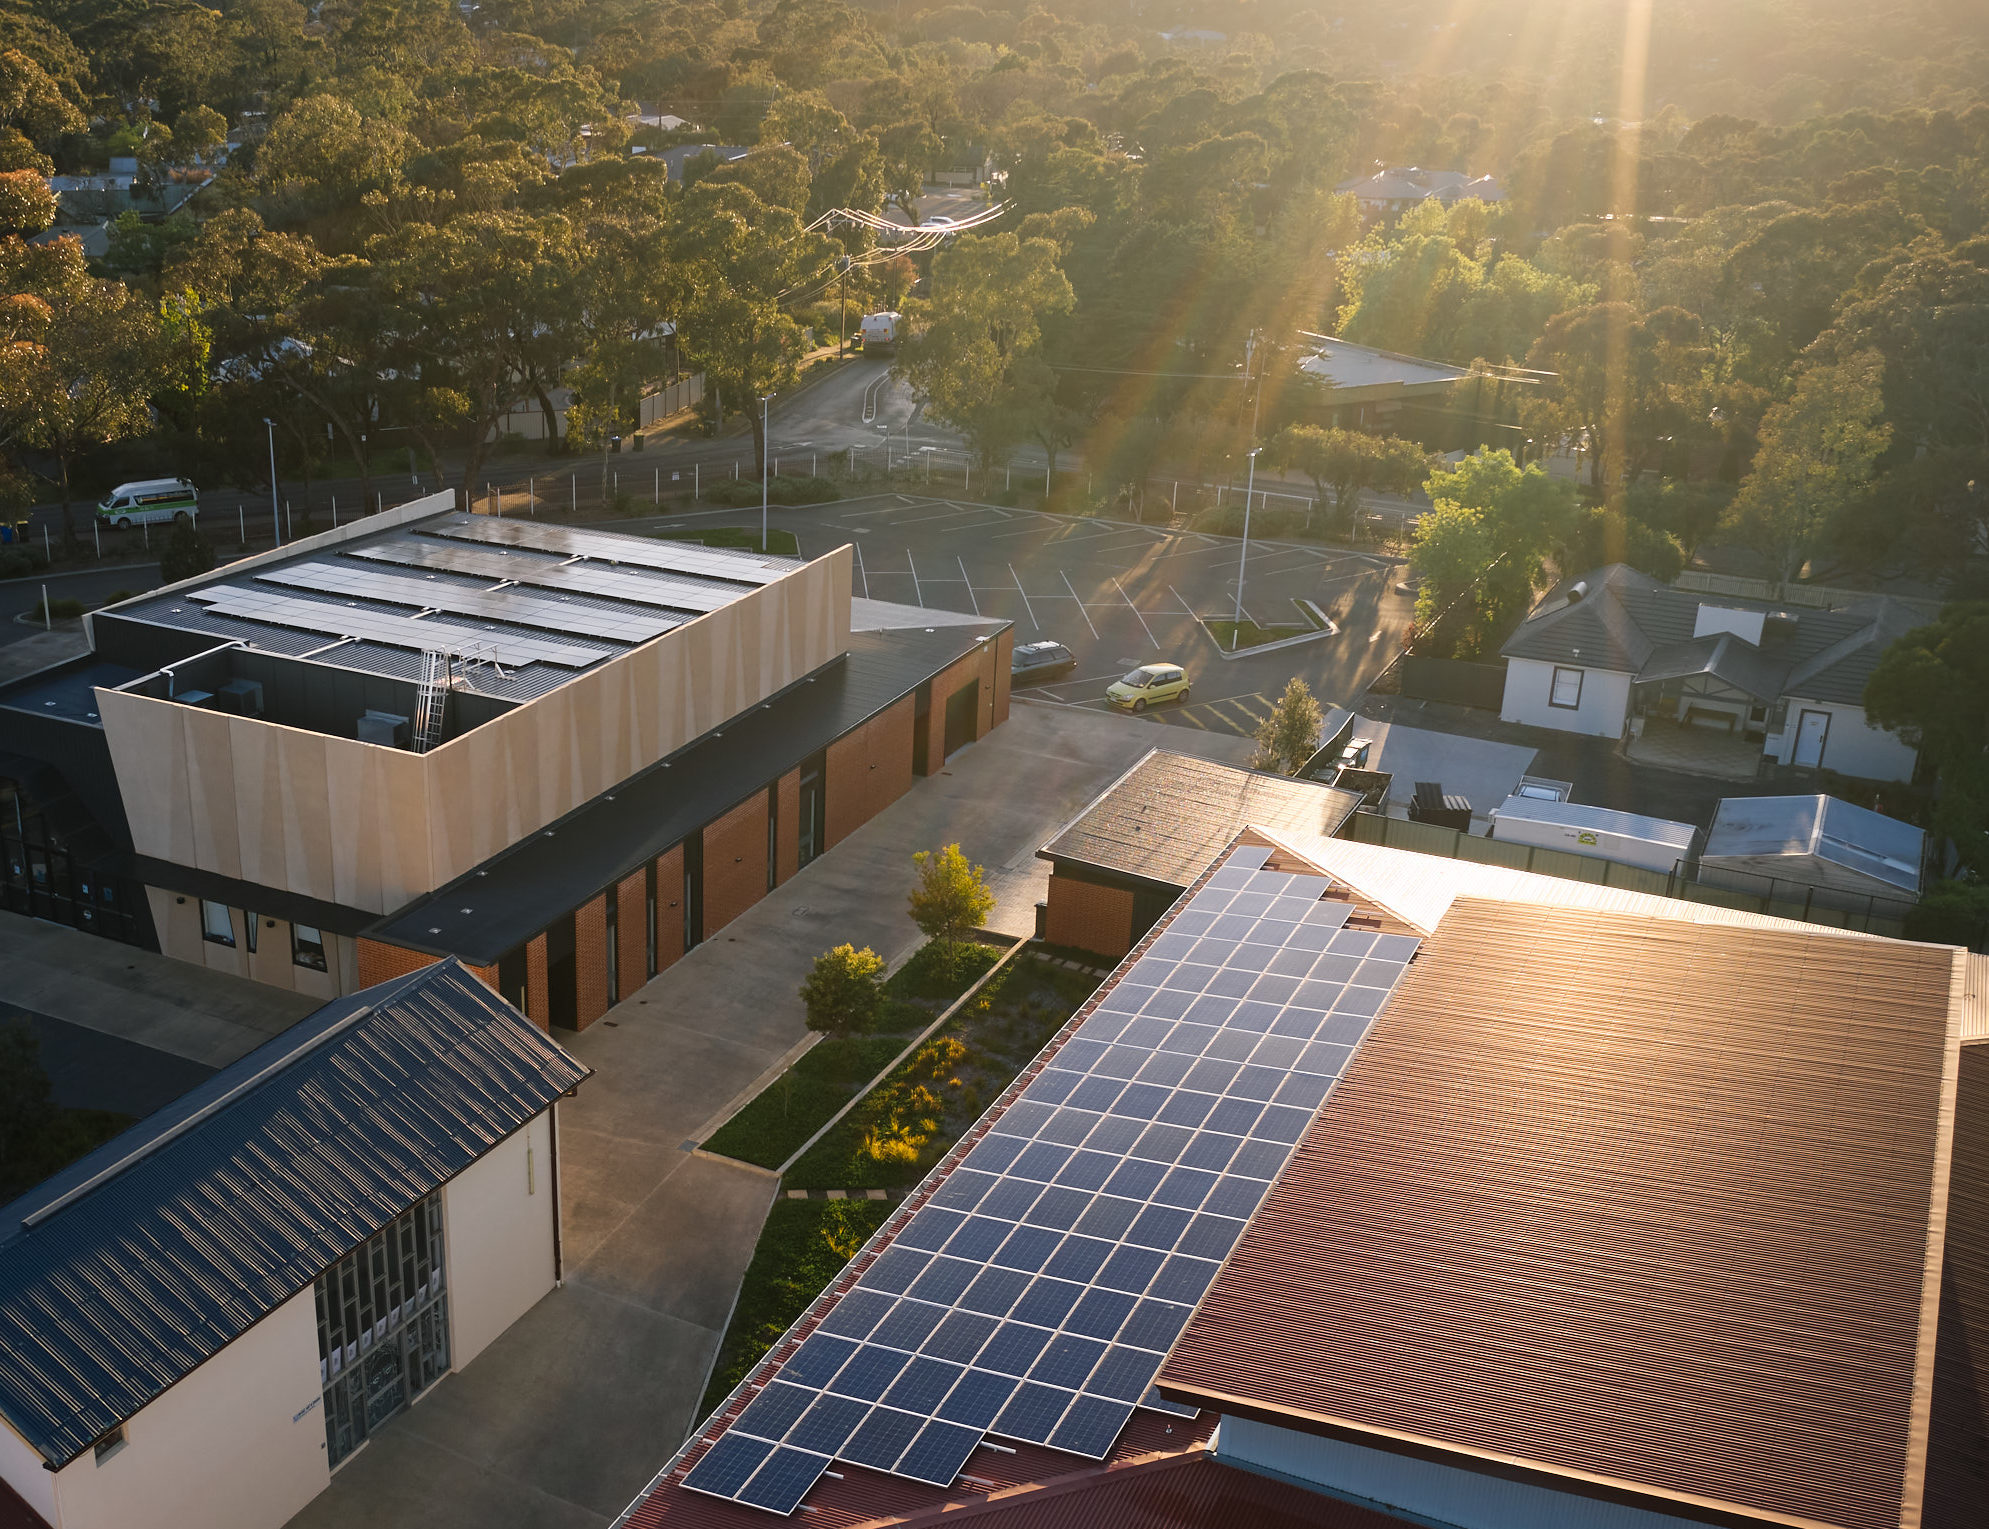 Clean energy sources for residential and commercial
(Image credits: zenenergy.com.au)